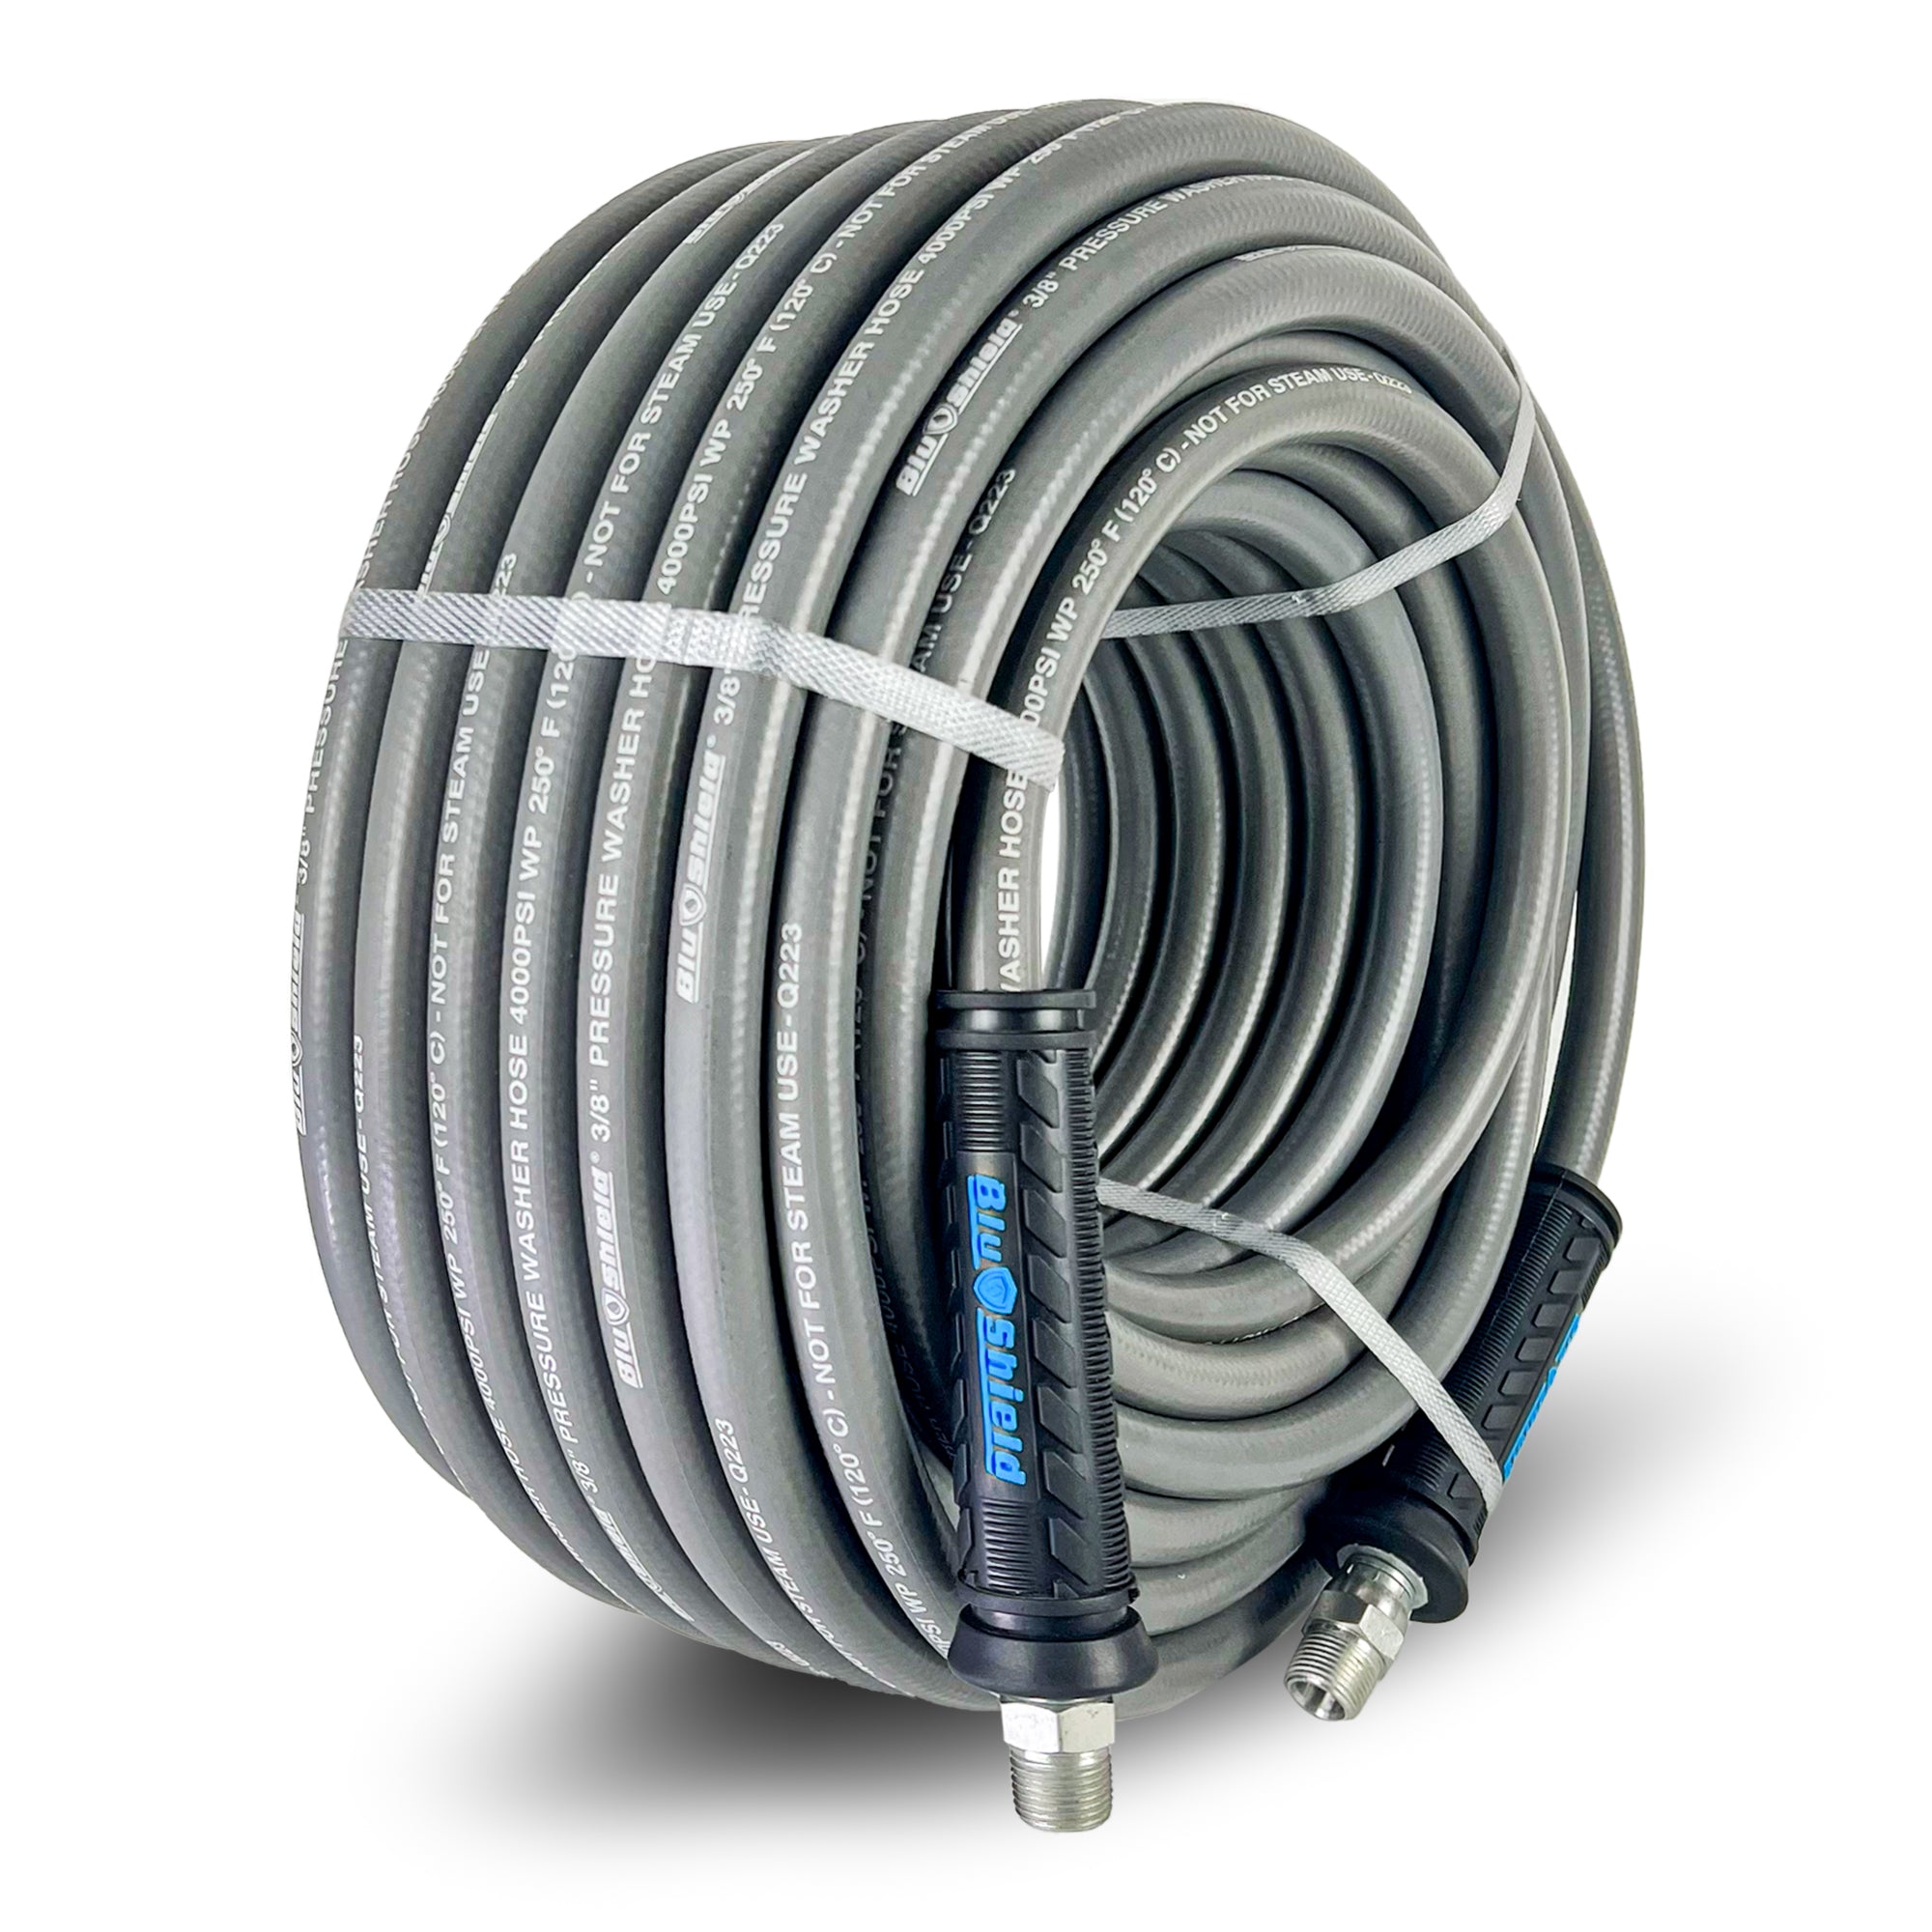 BluShield 3/8" Single Wire Pressure Washer Replacement Hose with NPT Fittings, 4000PSI